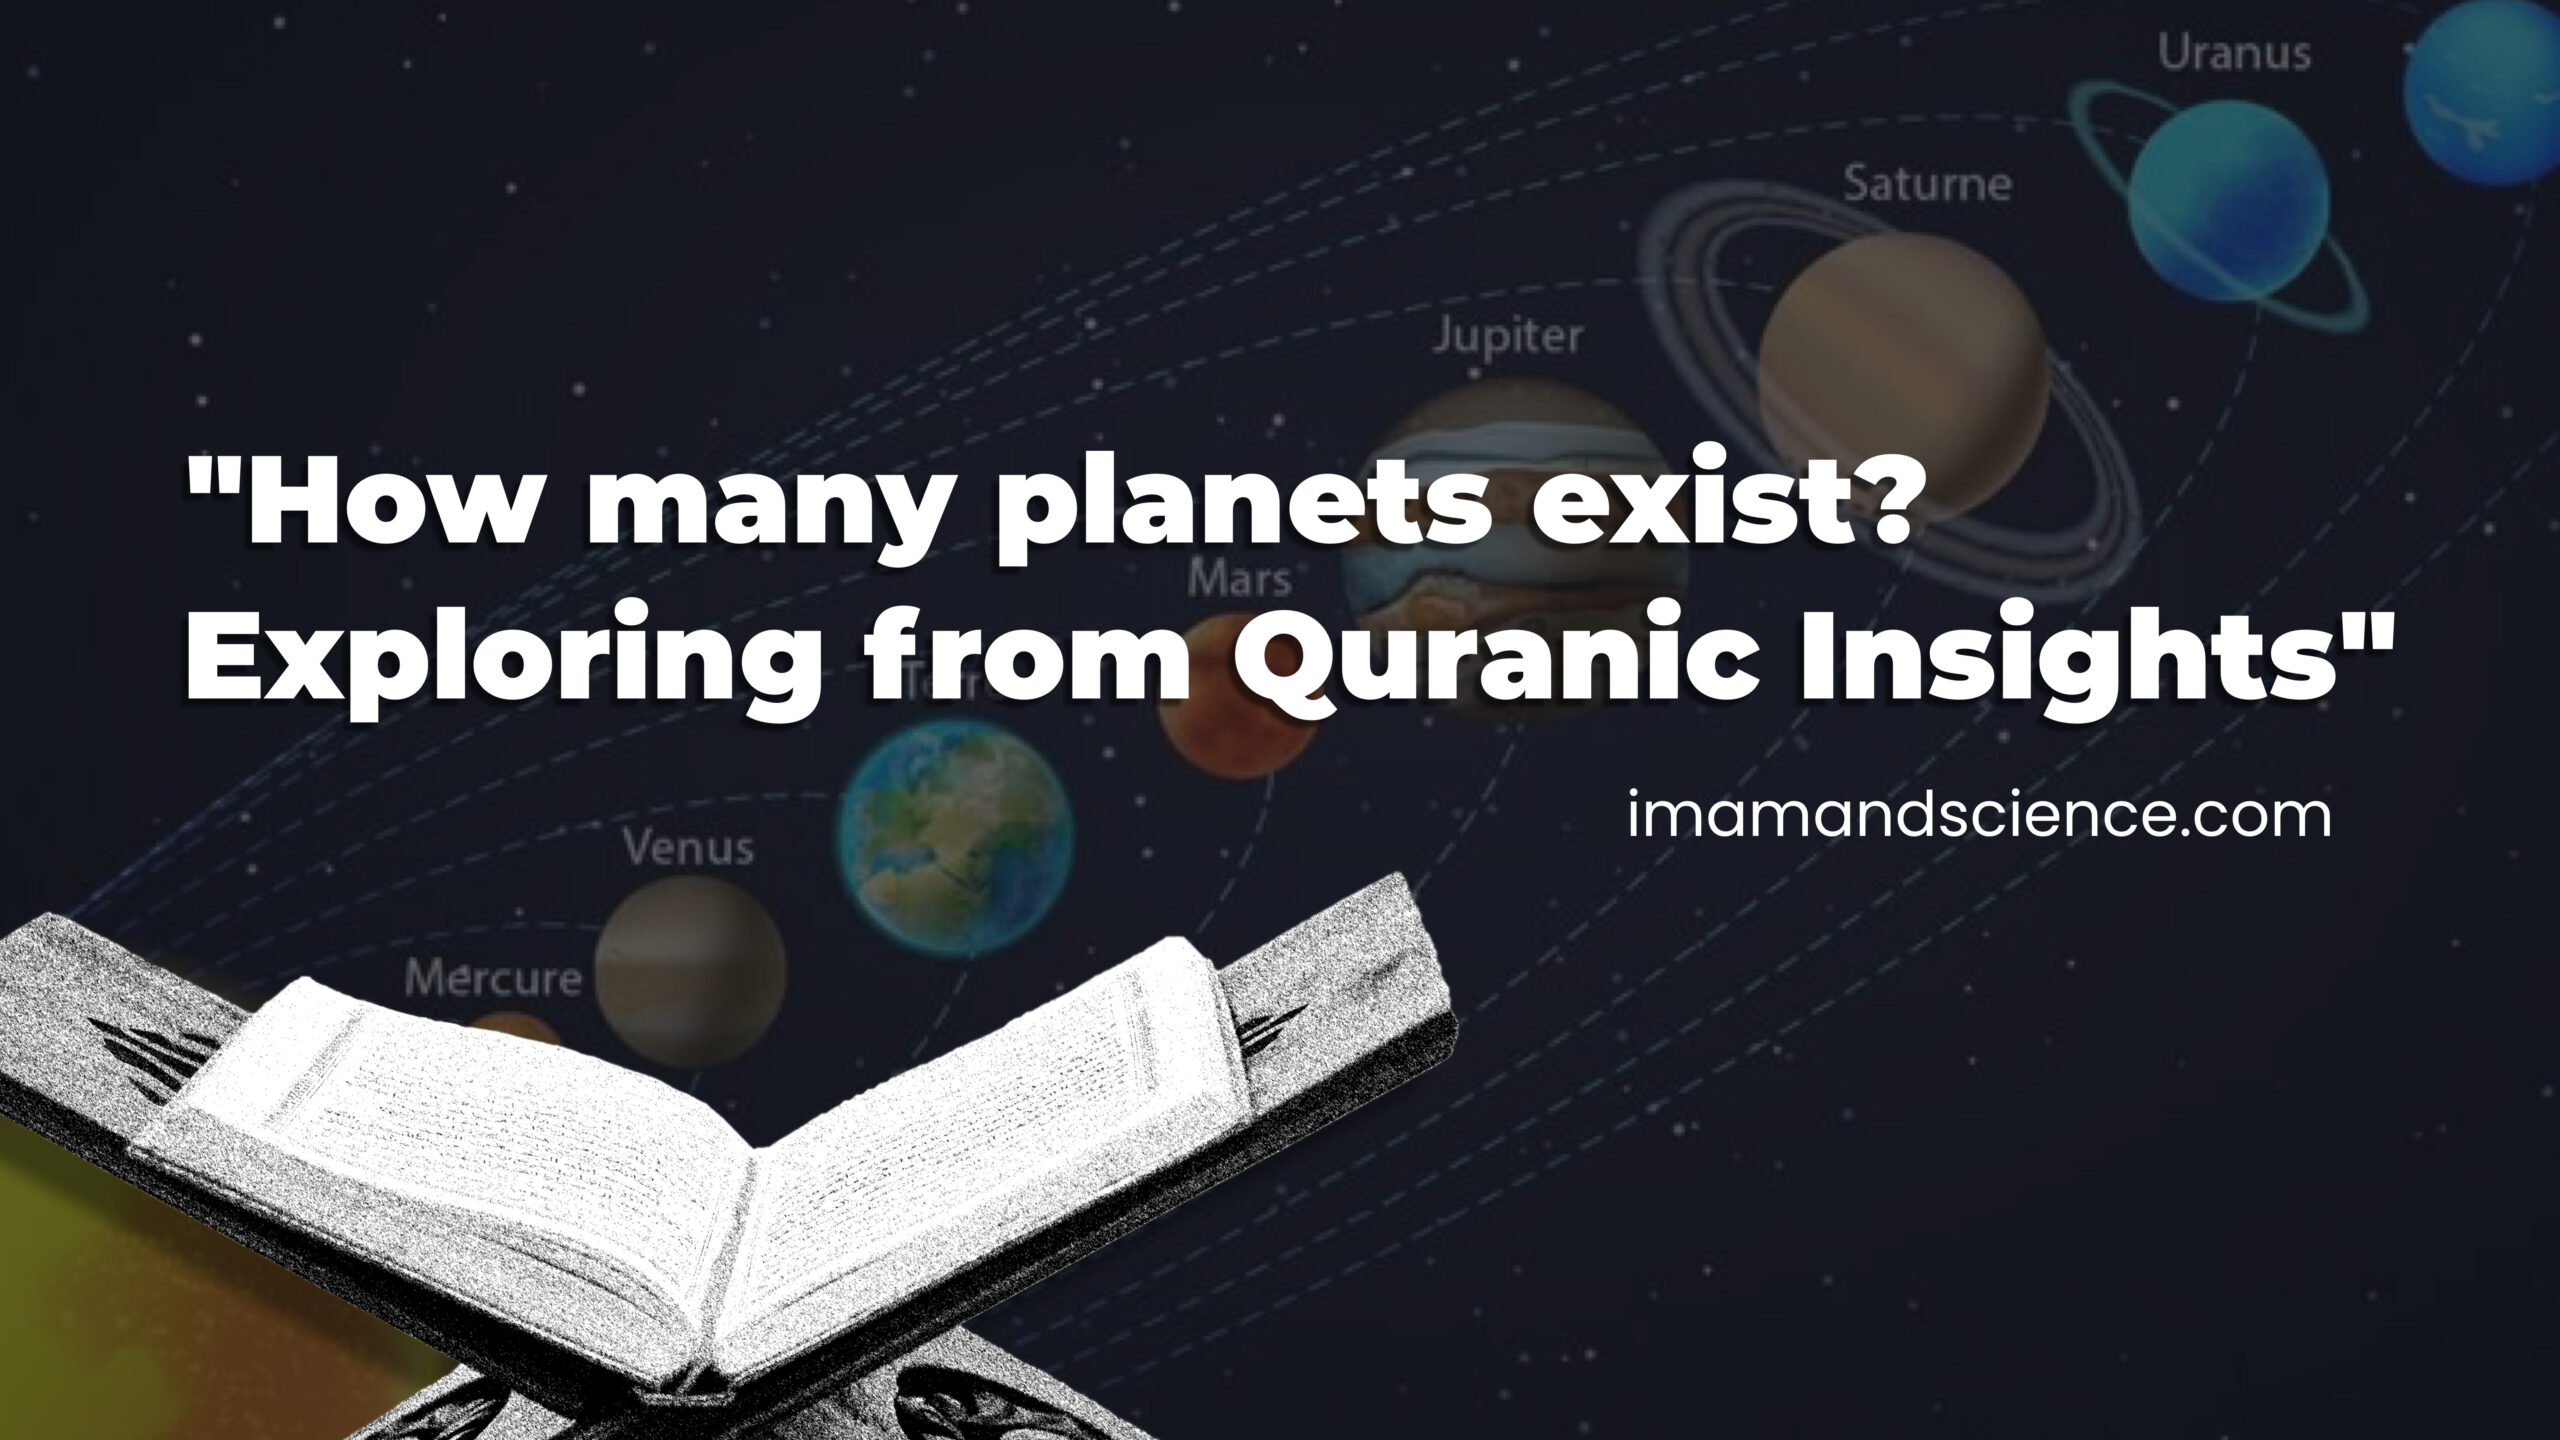 How Many Planets Exist?: Exploring from Quranic Insights